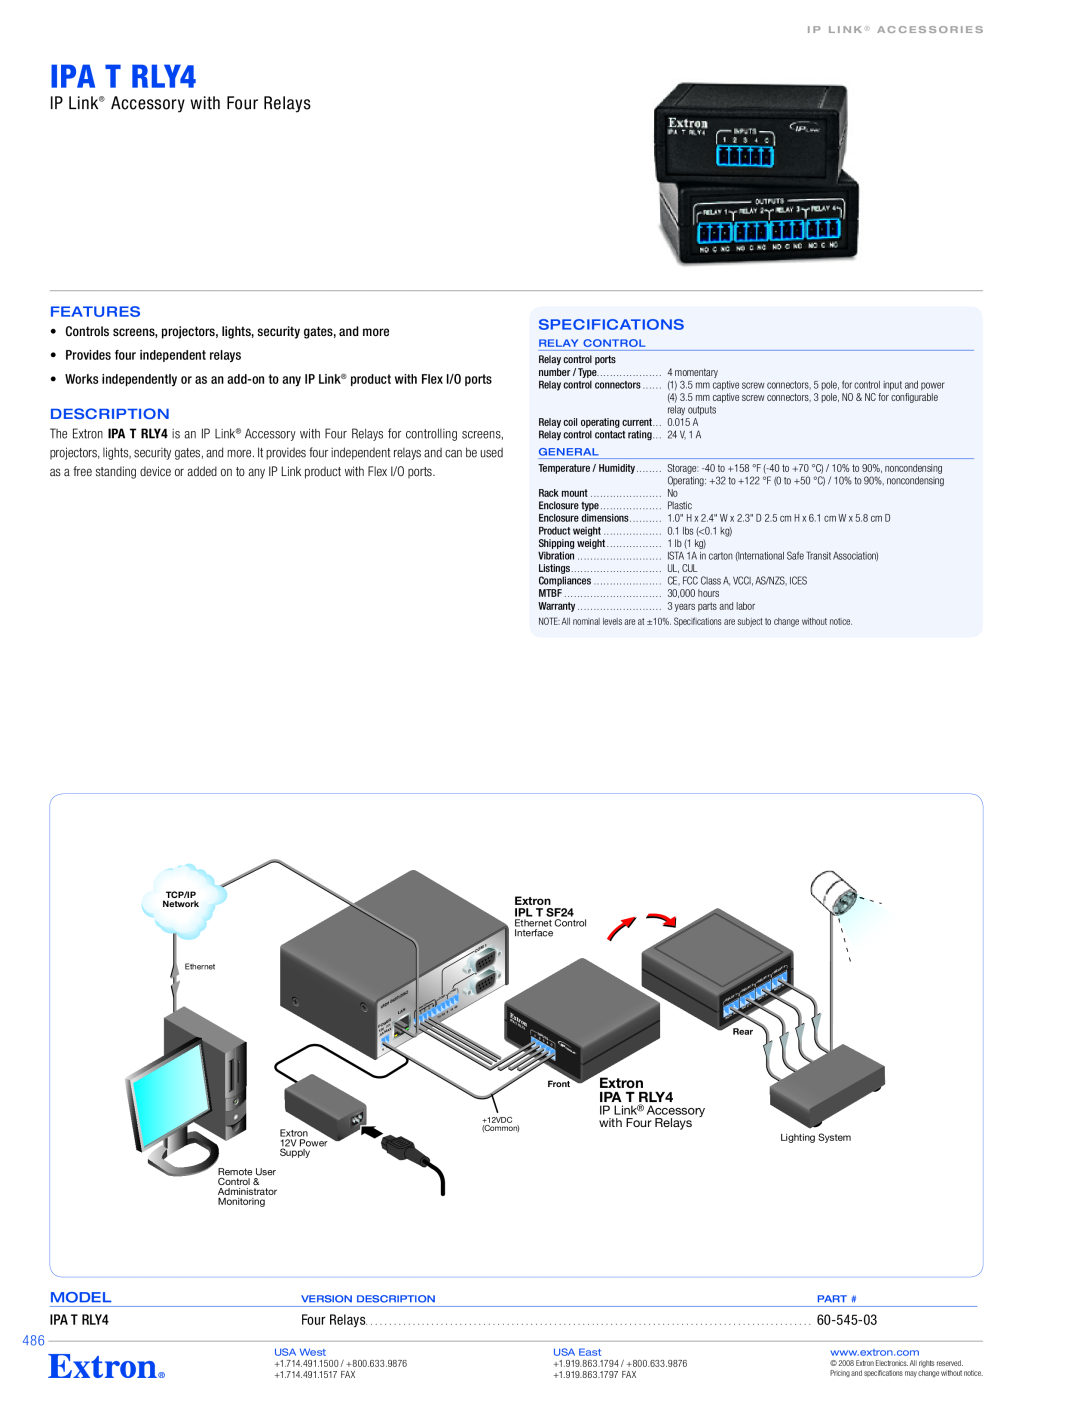 Extron electronic IPA T RLY4 specifications IP Link Accessory with Four Relays, Features, Description, Specifications 